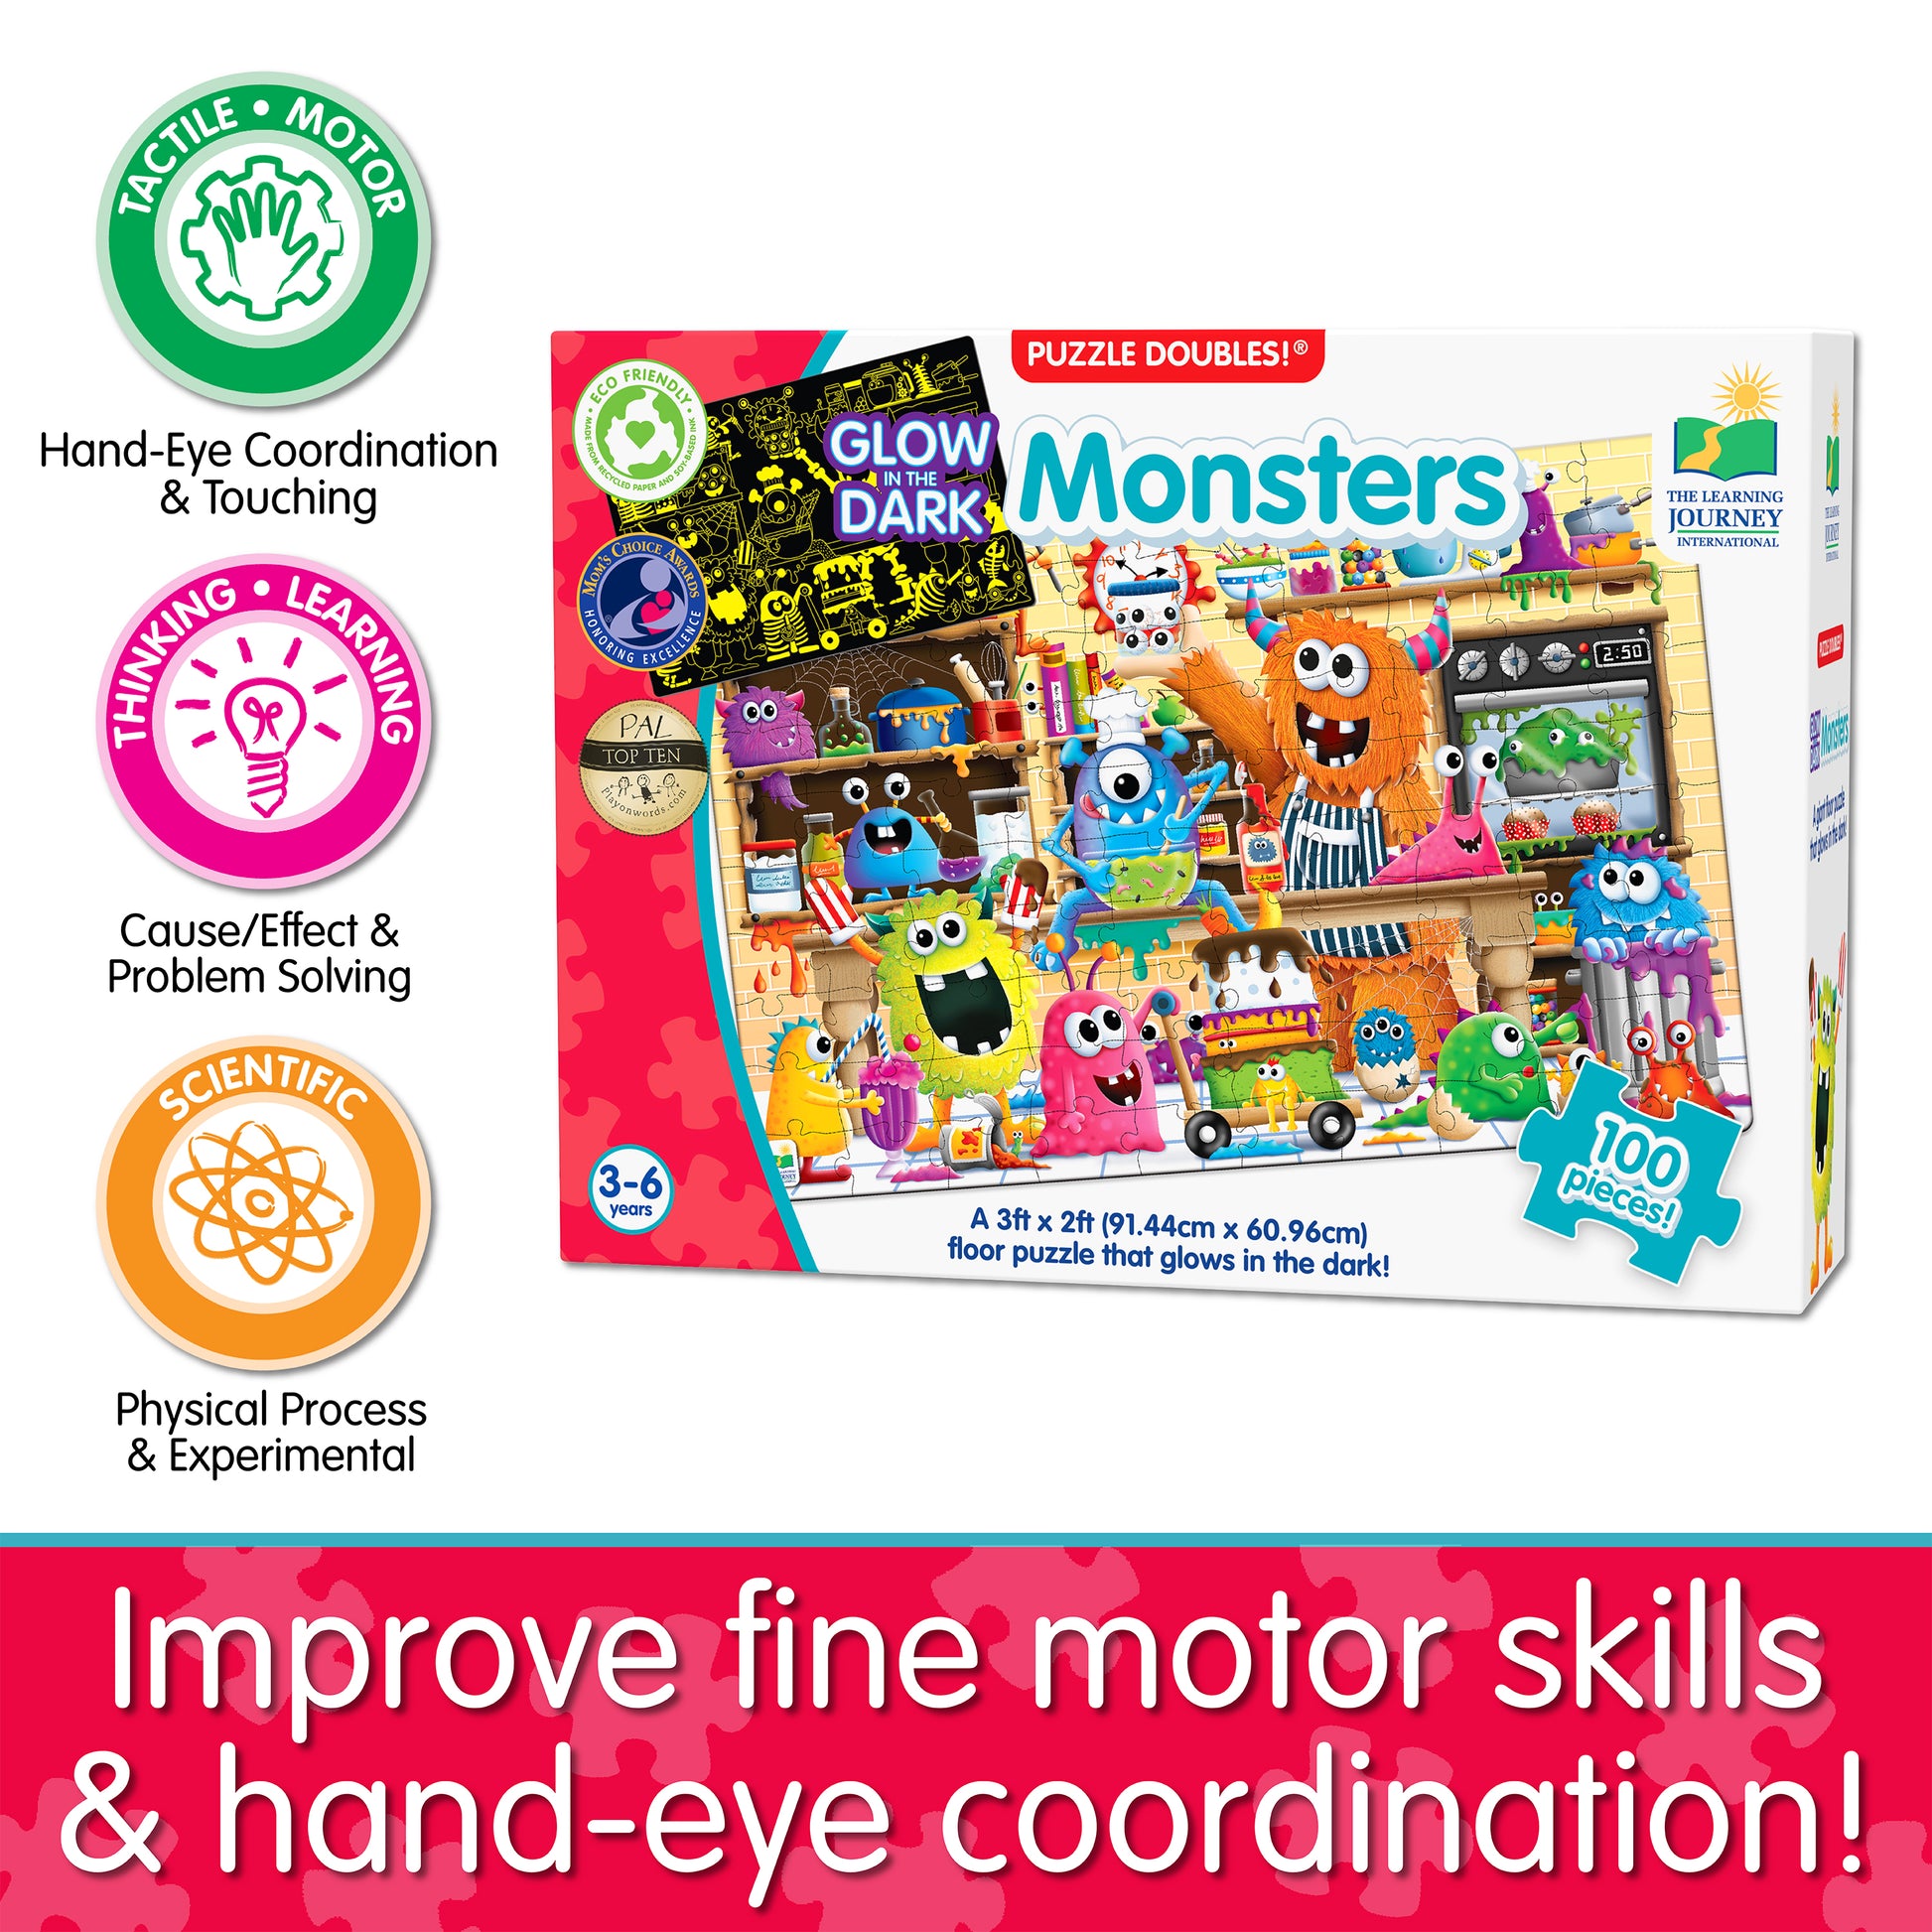 Infographic about Glow in the Dark - Monsters' educational benefits that says, "Improve fine motor skills and hand-eye coordination!"